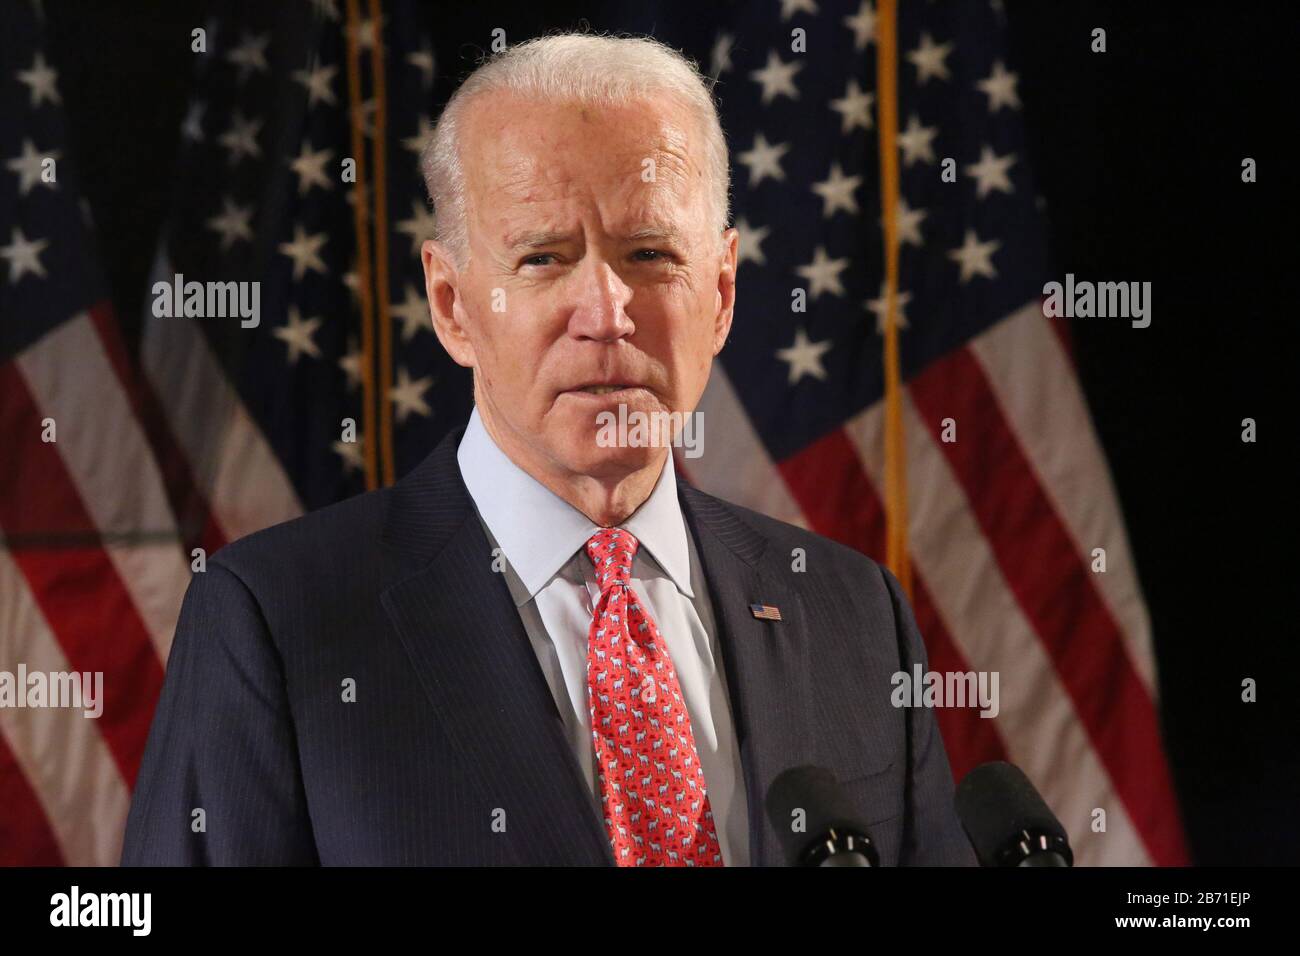 Wilmington, DE, USA. 12th Mar, 2020. :Former Vice President, Joe Biden giving a speech on combating Coronavirus at the Hotel Du Poet in Wilmington, Delaware March 12, 2020 Credit: : Star Shooter/Media Punch/Alamy Live News Stock Photo